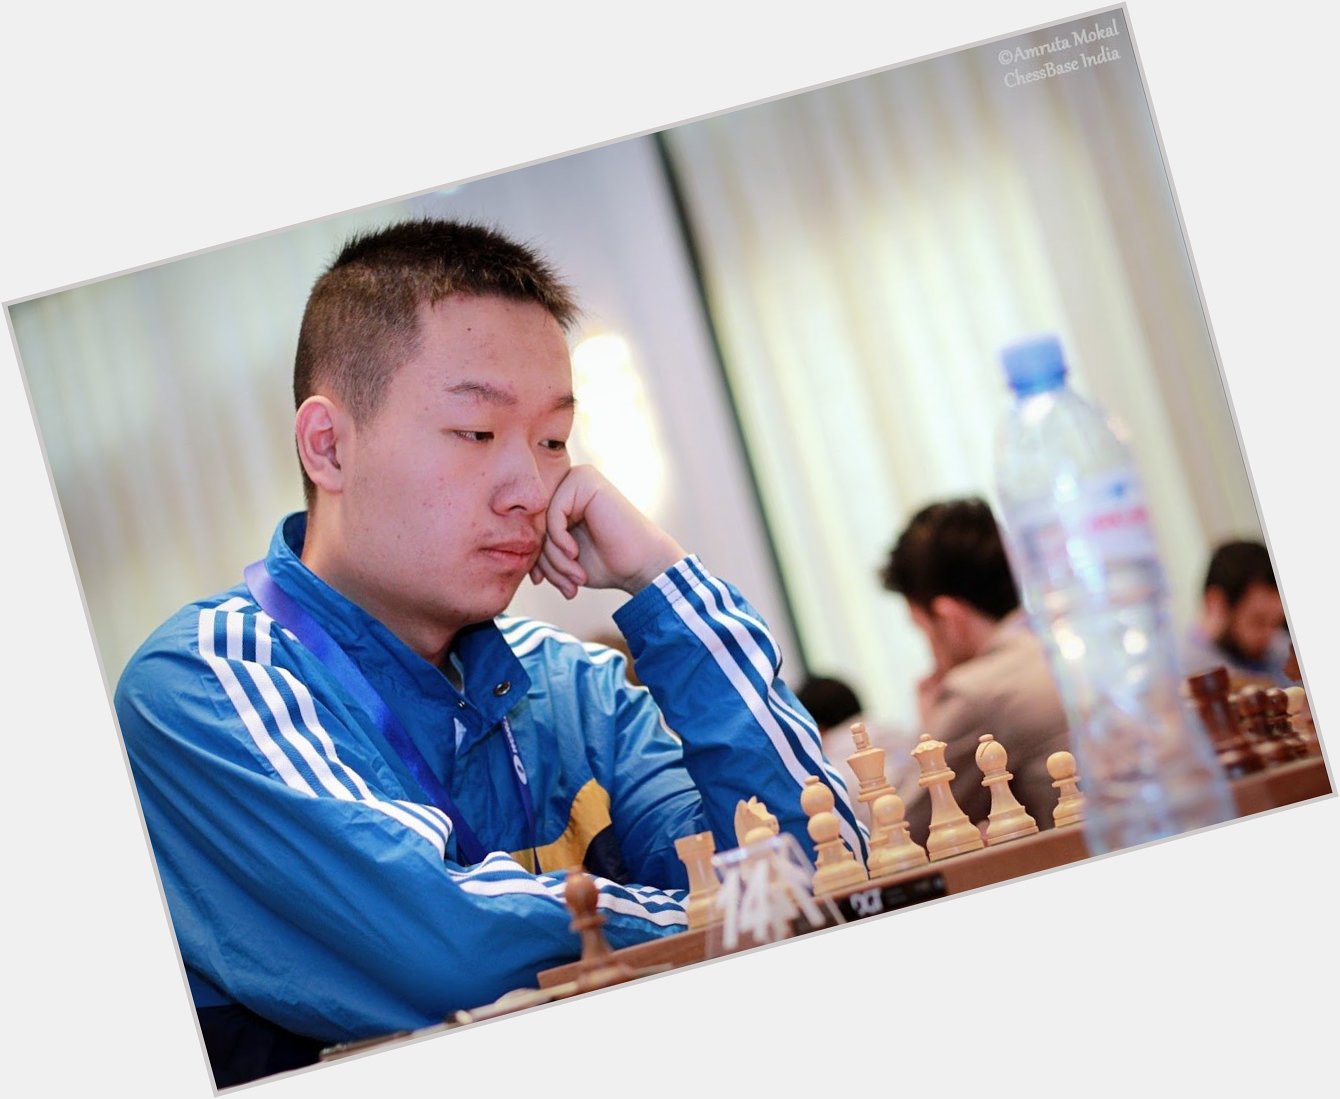 Happy Birthday to GMs Wei Yi and Gata Kamsky! in   Amruta Mokal & Lennart Ootes 